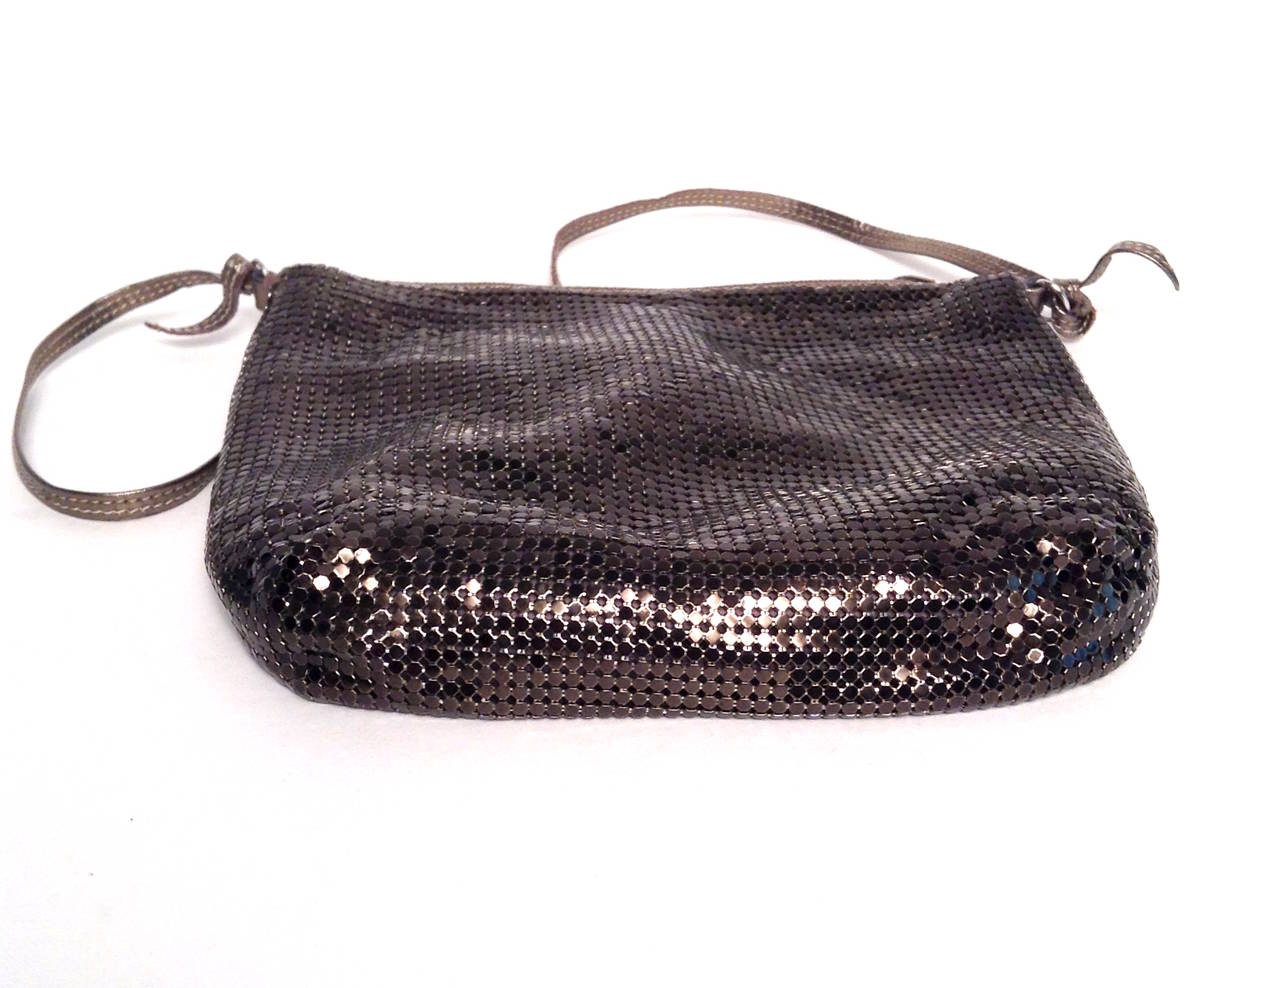 Women's Whiting and Davis Disco mesh Top and Bag For Sale